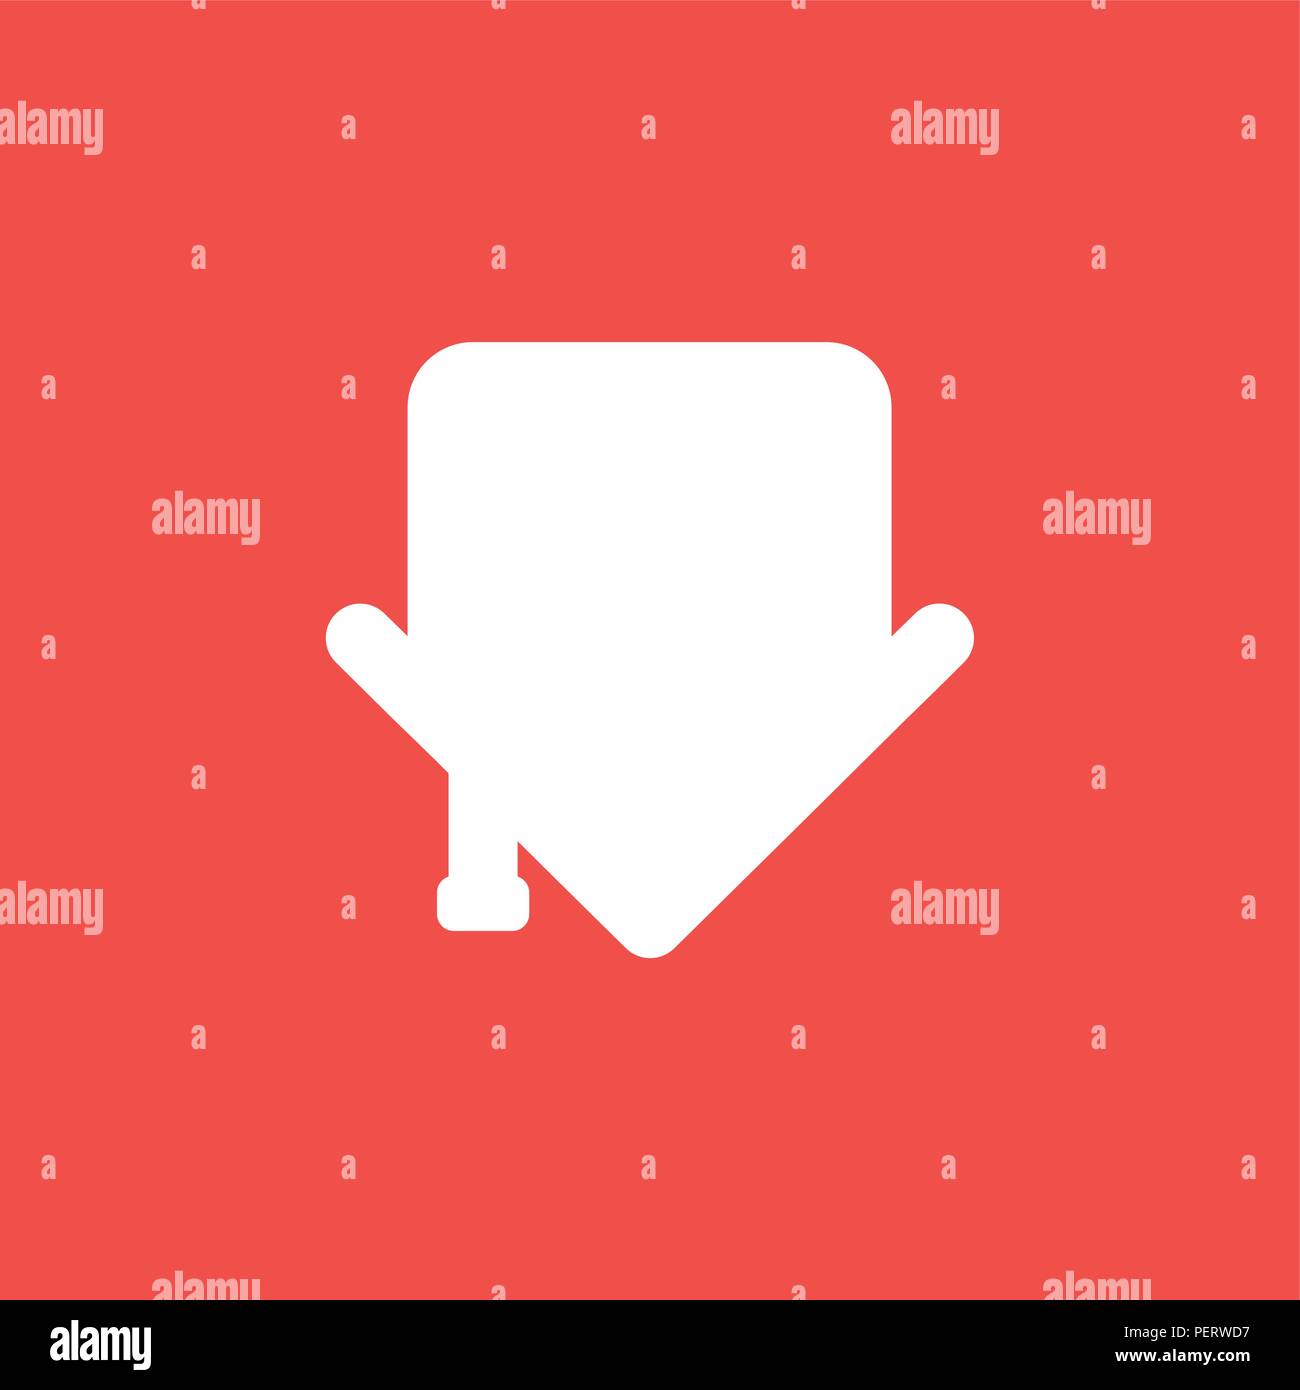 Flat vector icon concept of house arrow showing down on red background. Stock Vector